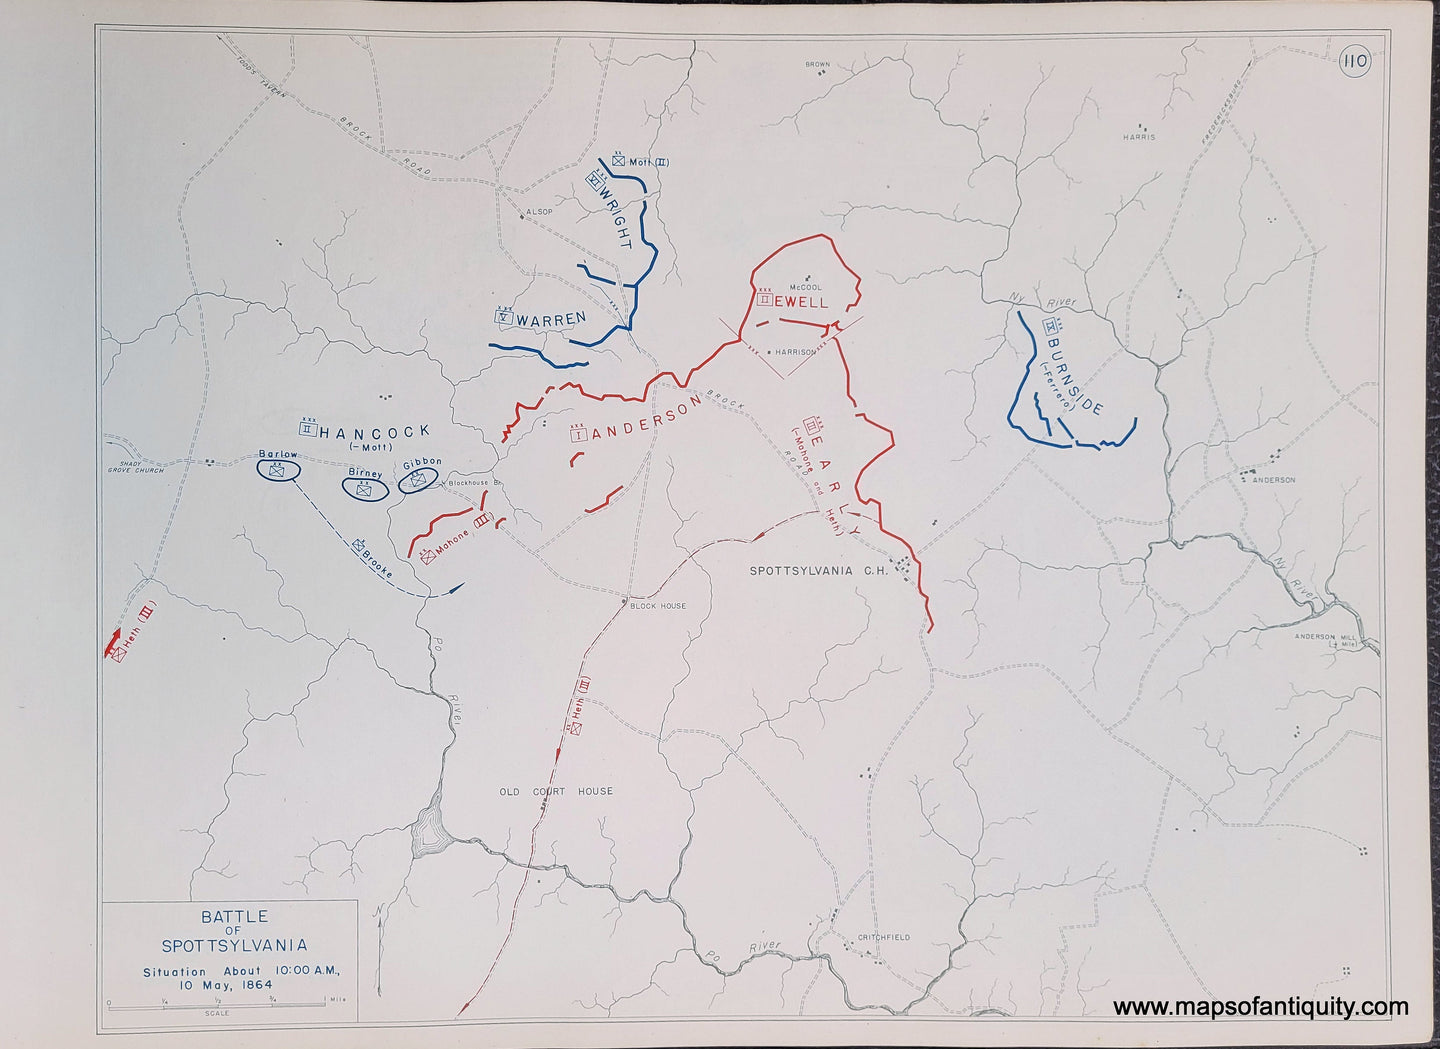 Genuine-Antique-Map-Battle-of-Spottsylvania-Situation-About-10-00-AM-10-May-1864-1948-Matthew-Forney-Steele-Dept-of-Military-Art-and-Engineering-US-Military-Academy-West-Point-Maps-Of-Antiquity